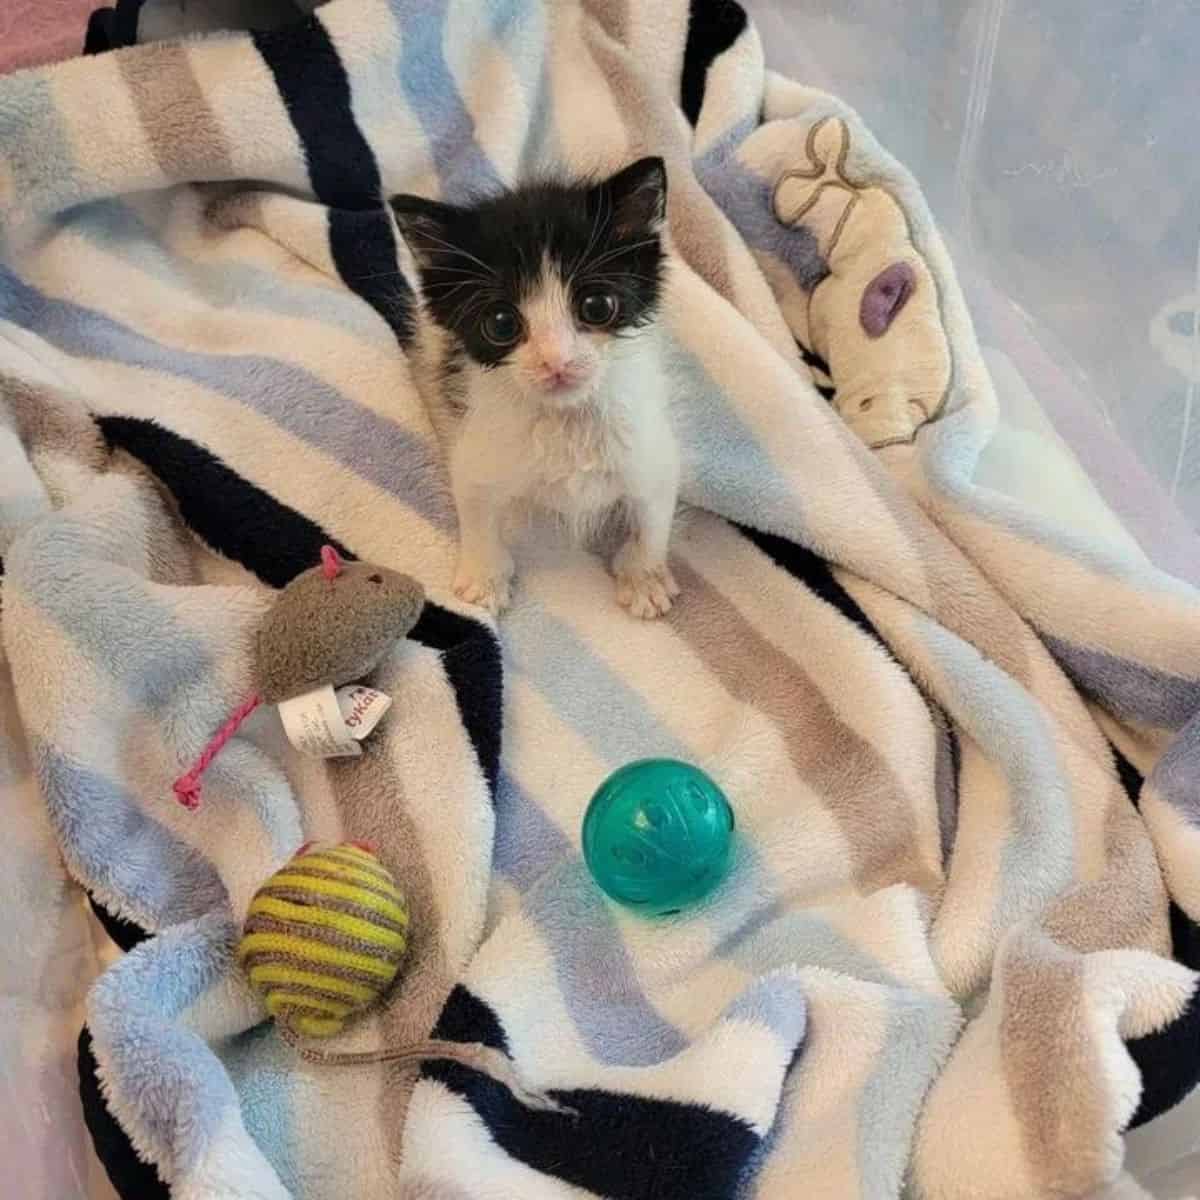 kitten sitting on a blanket with toys